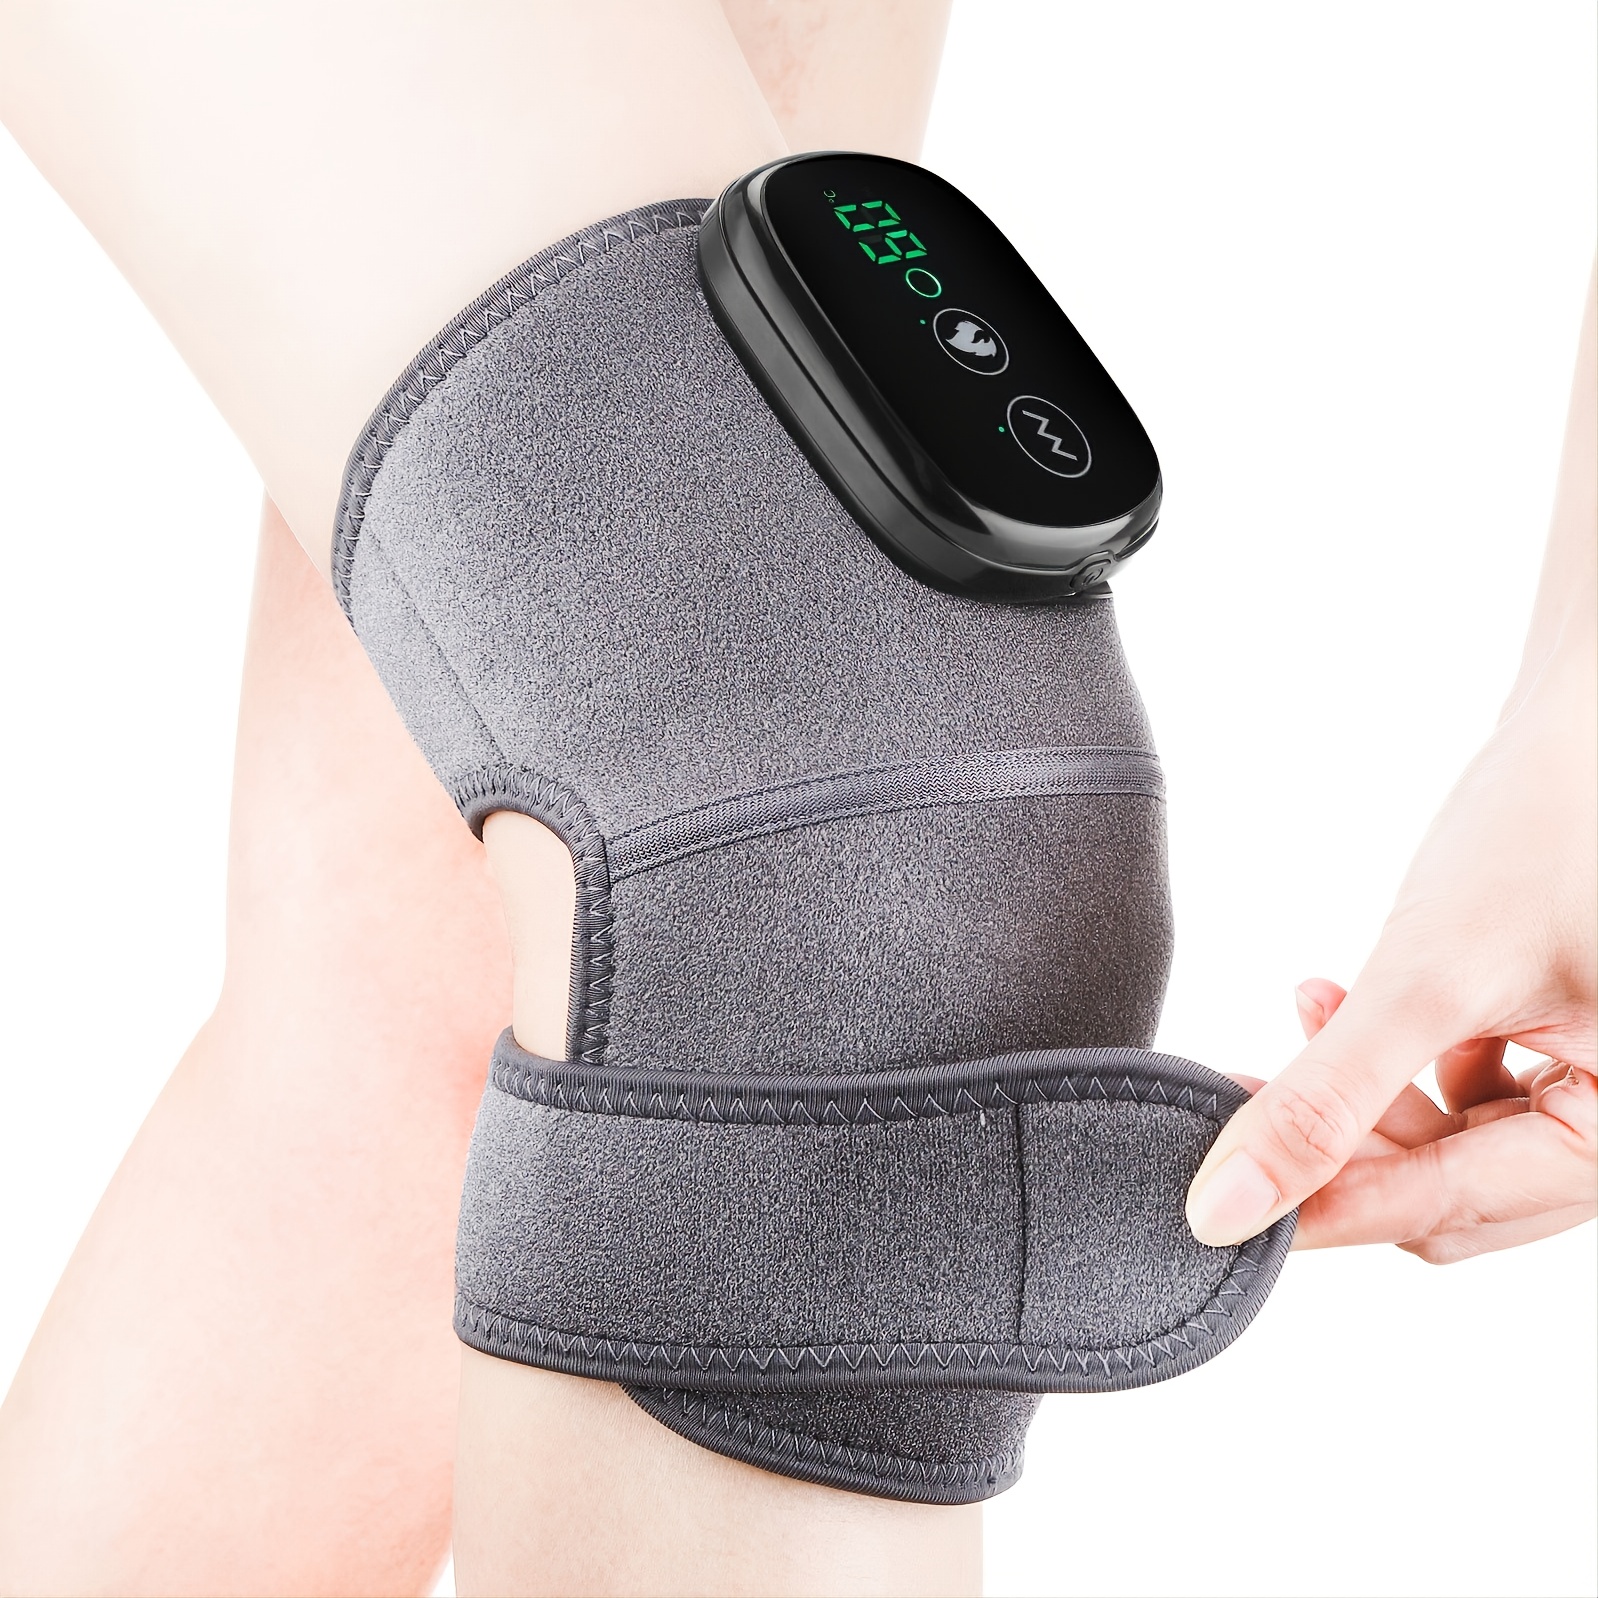 Dropship Relieve Knee, Shoulder & Elbow Pain With This Cordless Heated Knee  Brace Shoulder Wrap - 3 Adjustable Temperatures & Vibration Massage -  Perfect Gift For Birthdays & Valentine's Day! to Sell